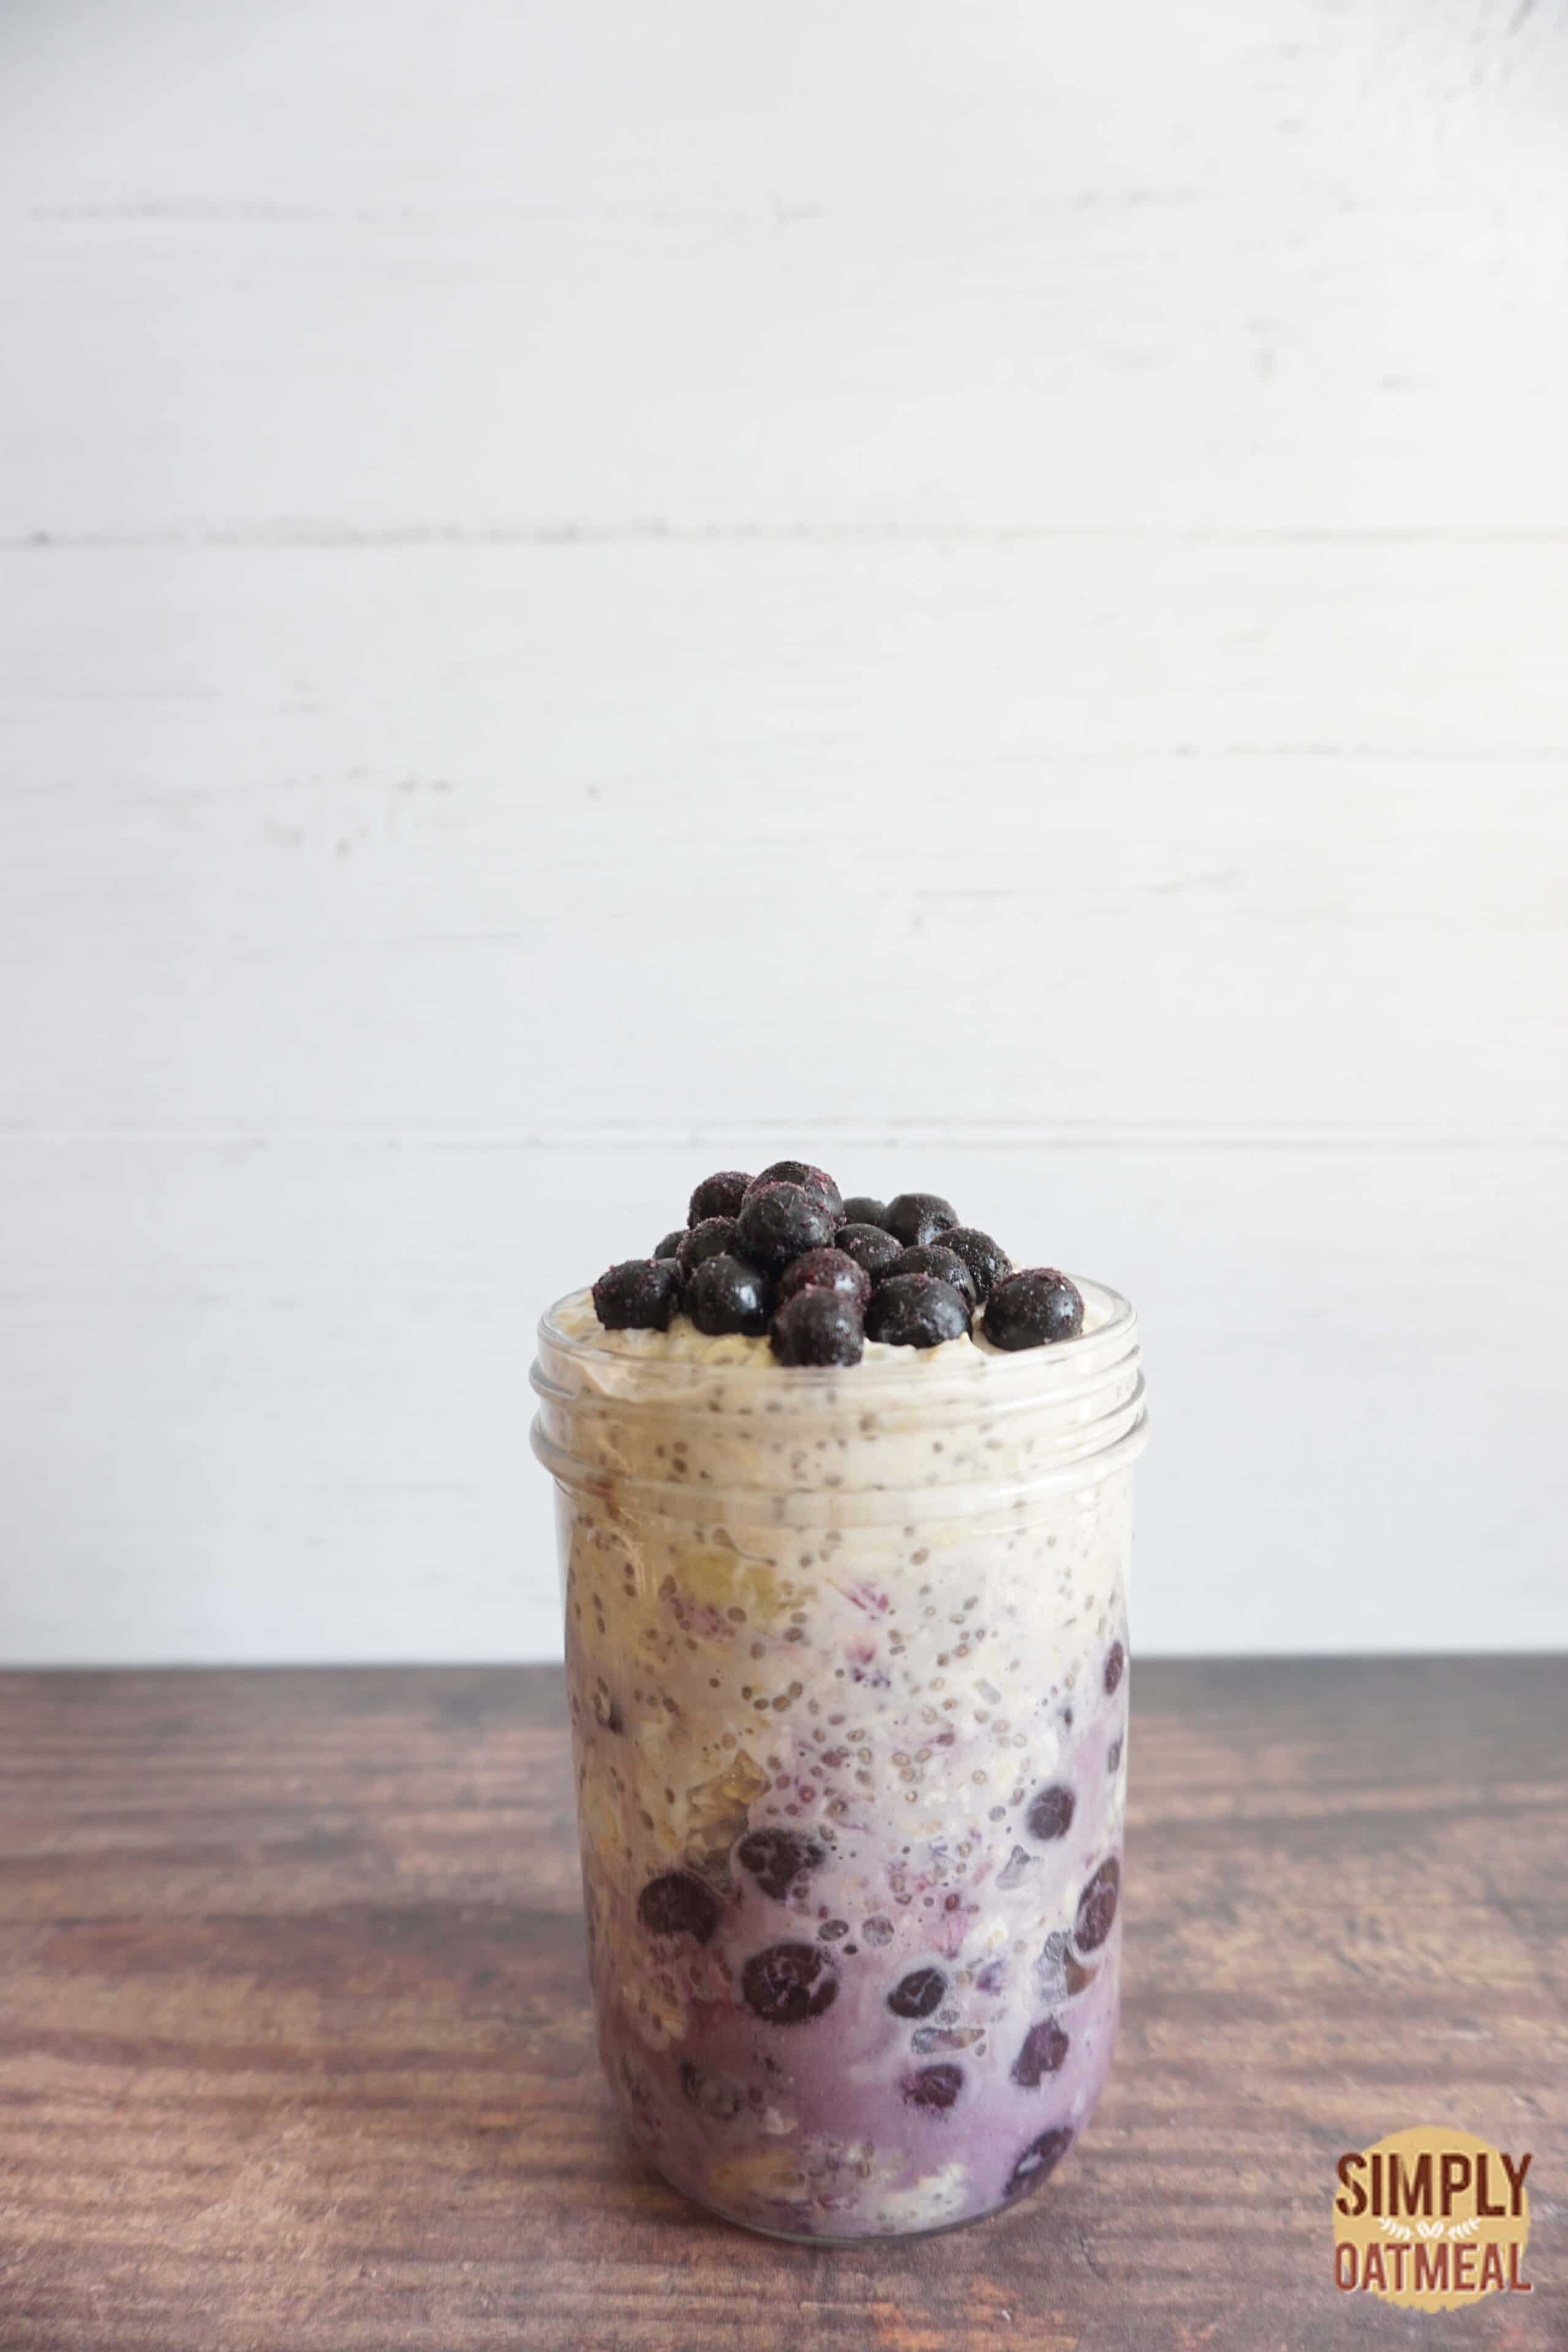 One serving of blueberry banana overnight oats in a meal prep container